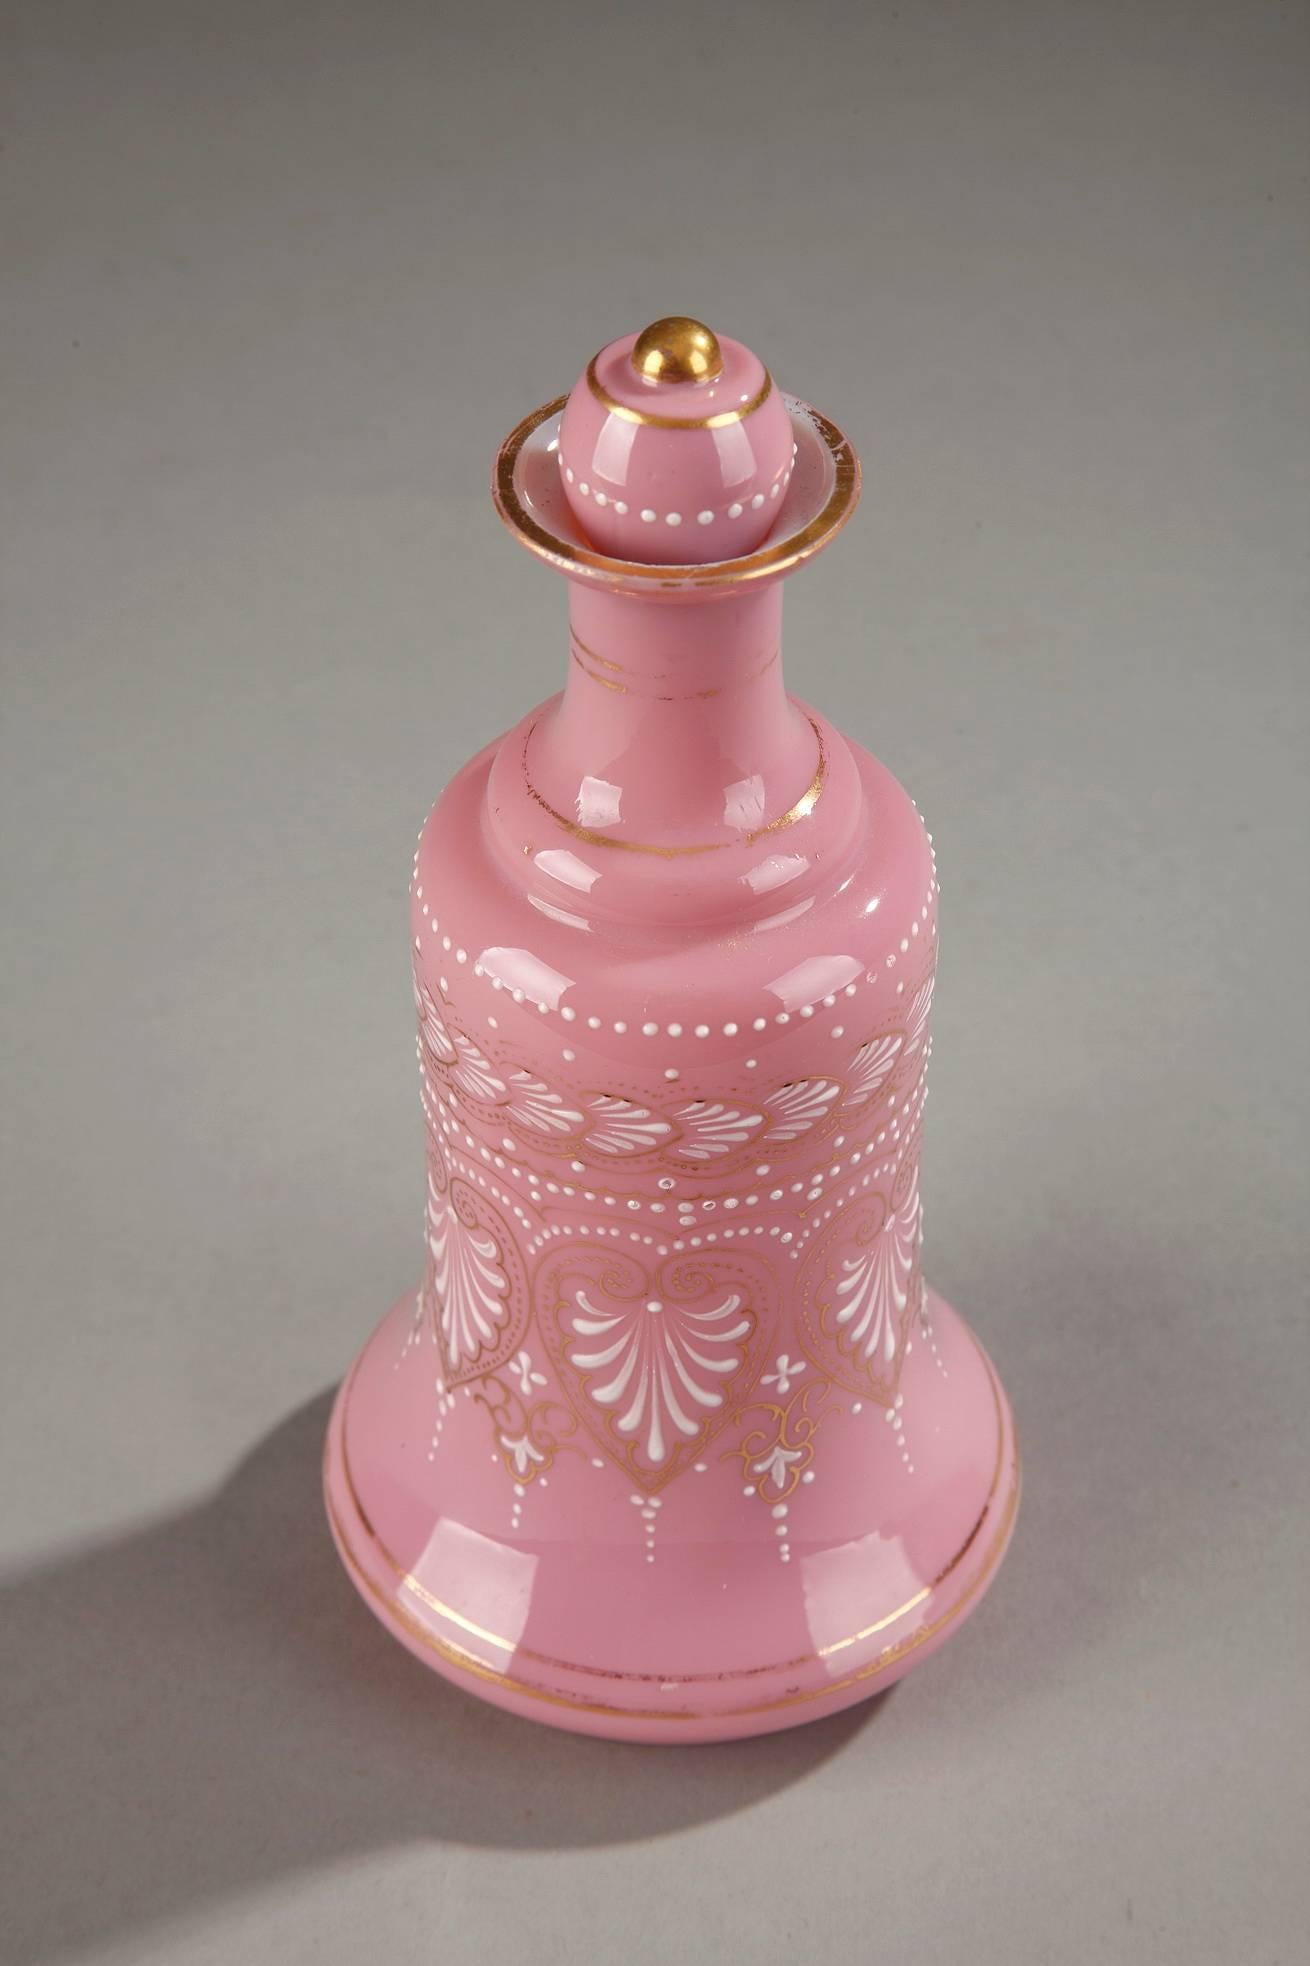 Pink opaline flask with white enamel decorations featuring palmettes, small dots, and floral motifs. Gold bands accent the base and the neck. The opaline imitates porcelain and is embellished with motifs from the Napoleonic Empire’s decorative